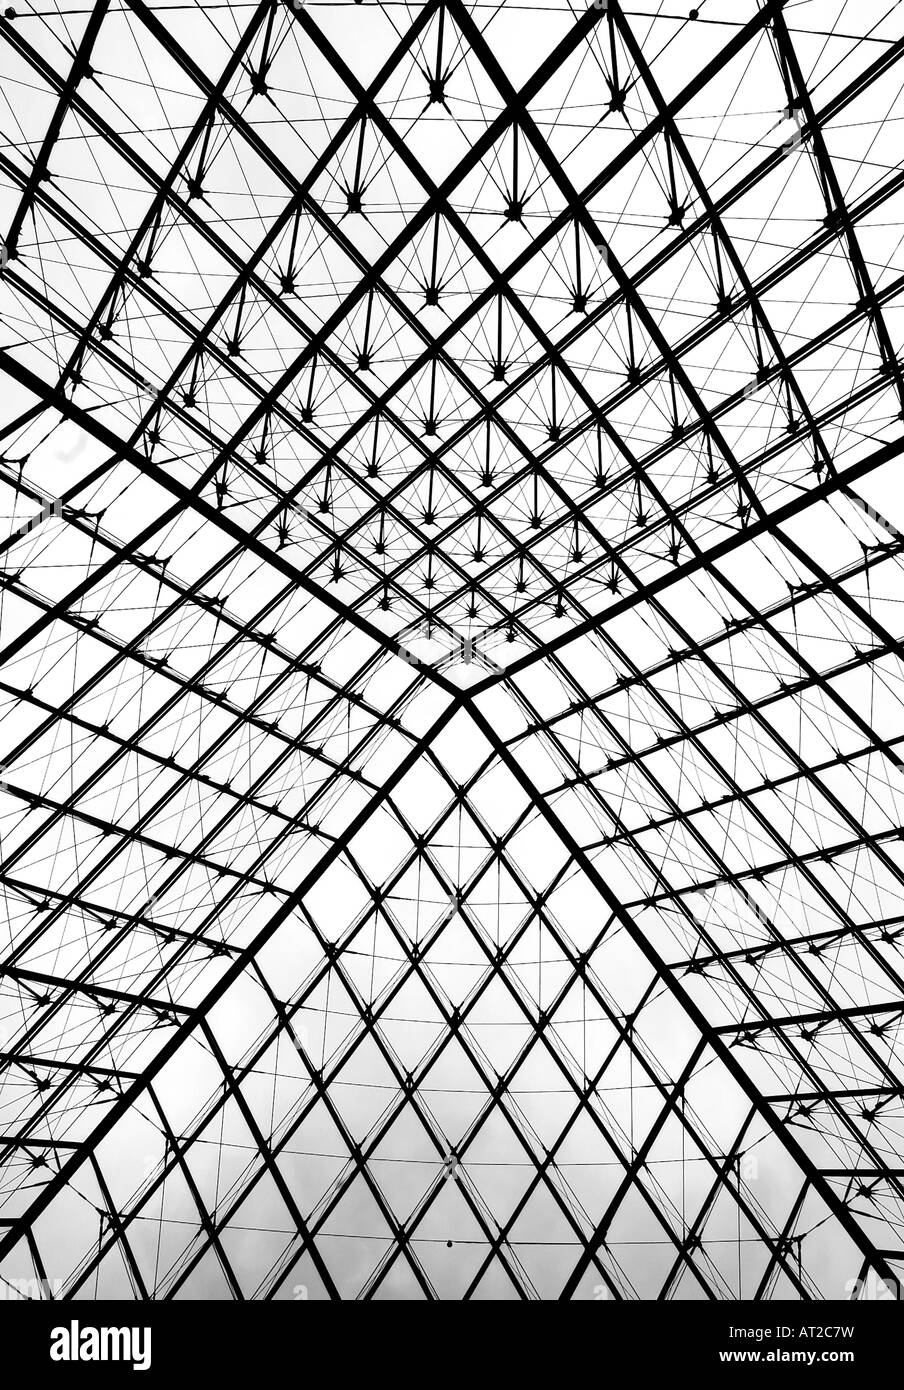 Glass pyramid entrance to the Louvre museum in Paris Shot form the entrance floor up to the sky Stock Photo